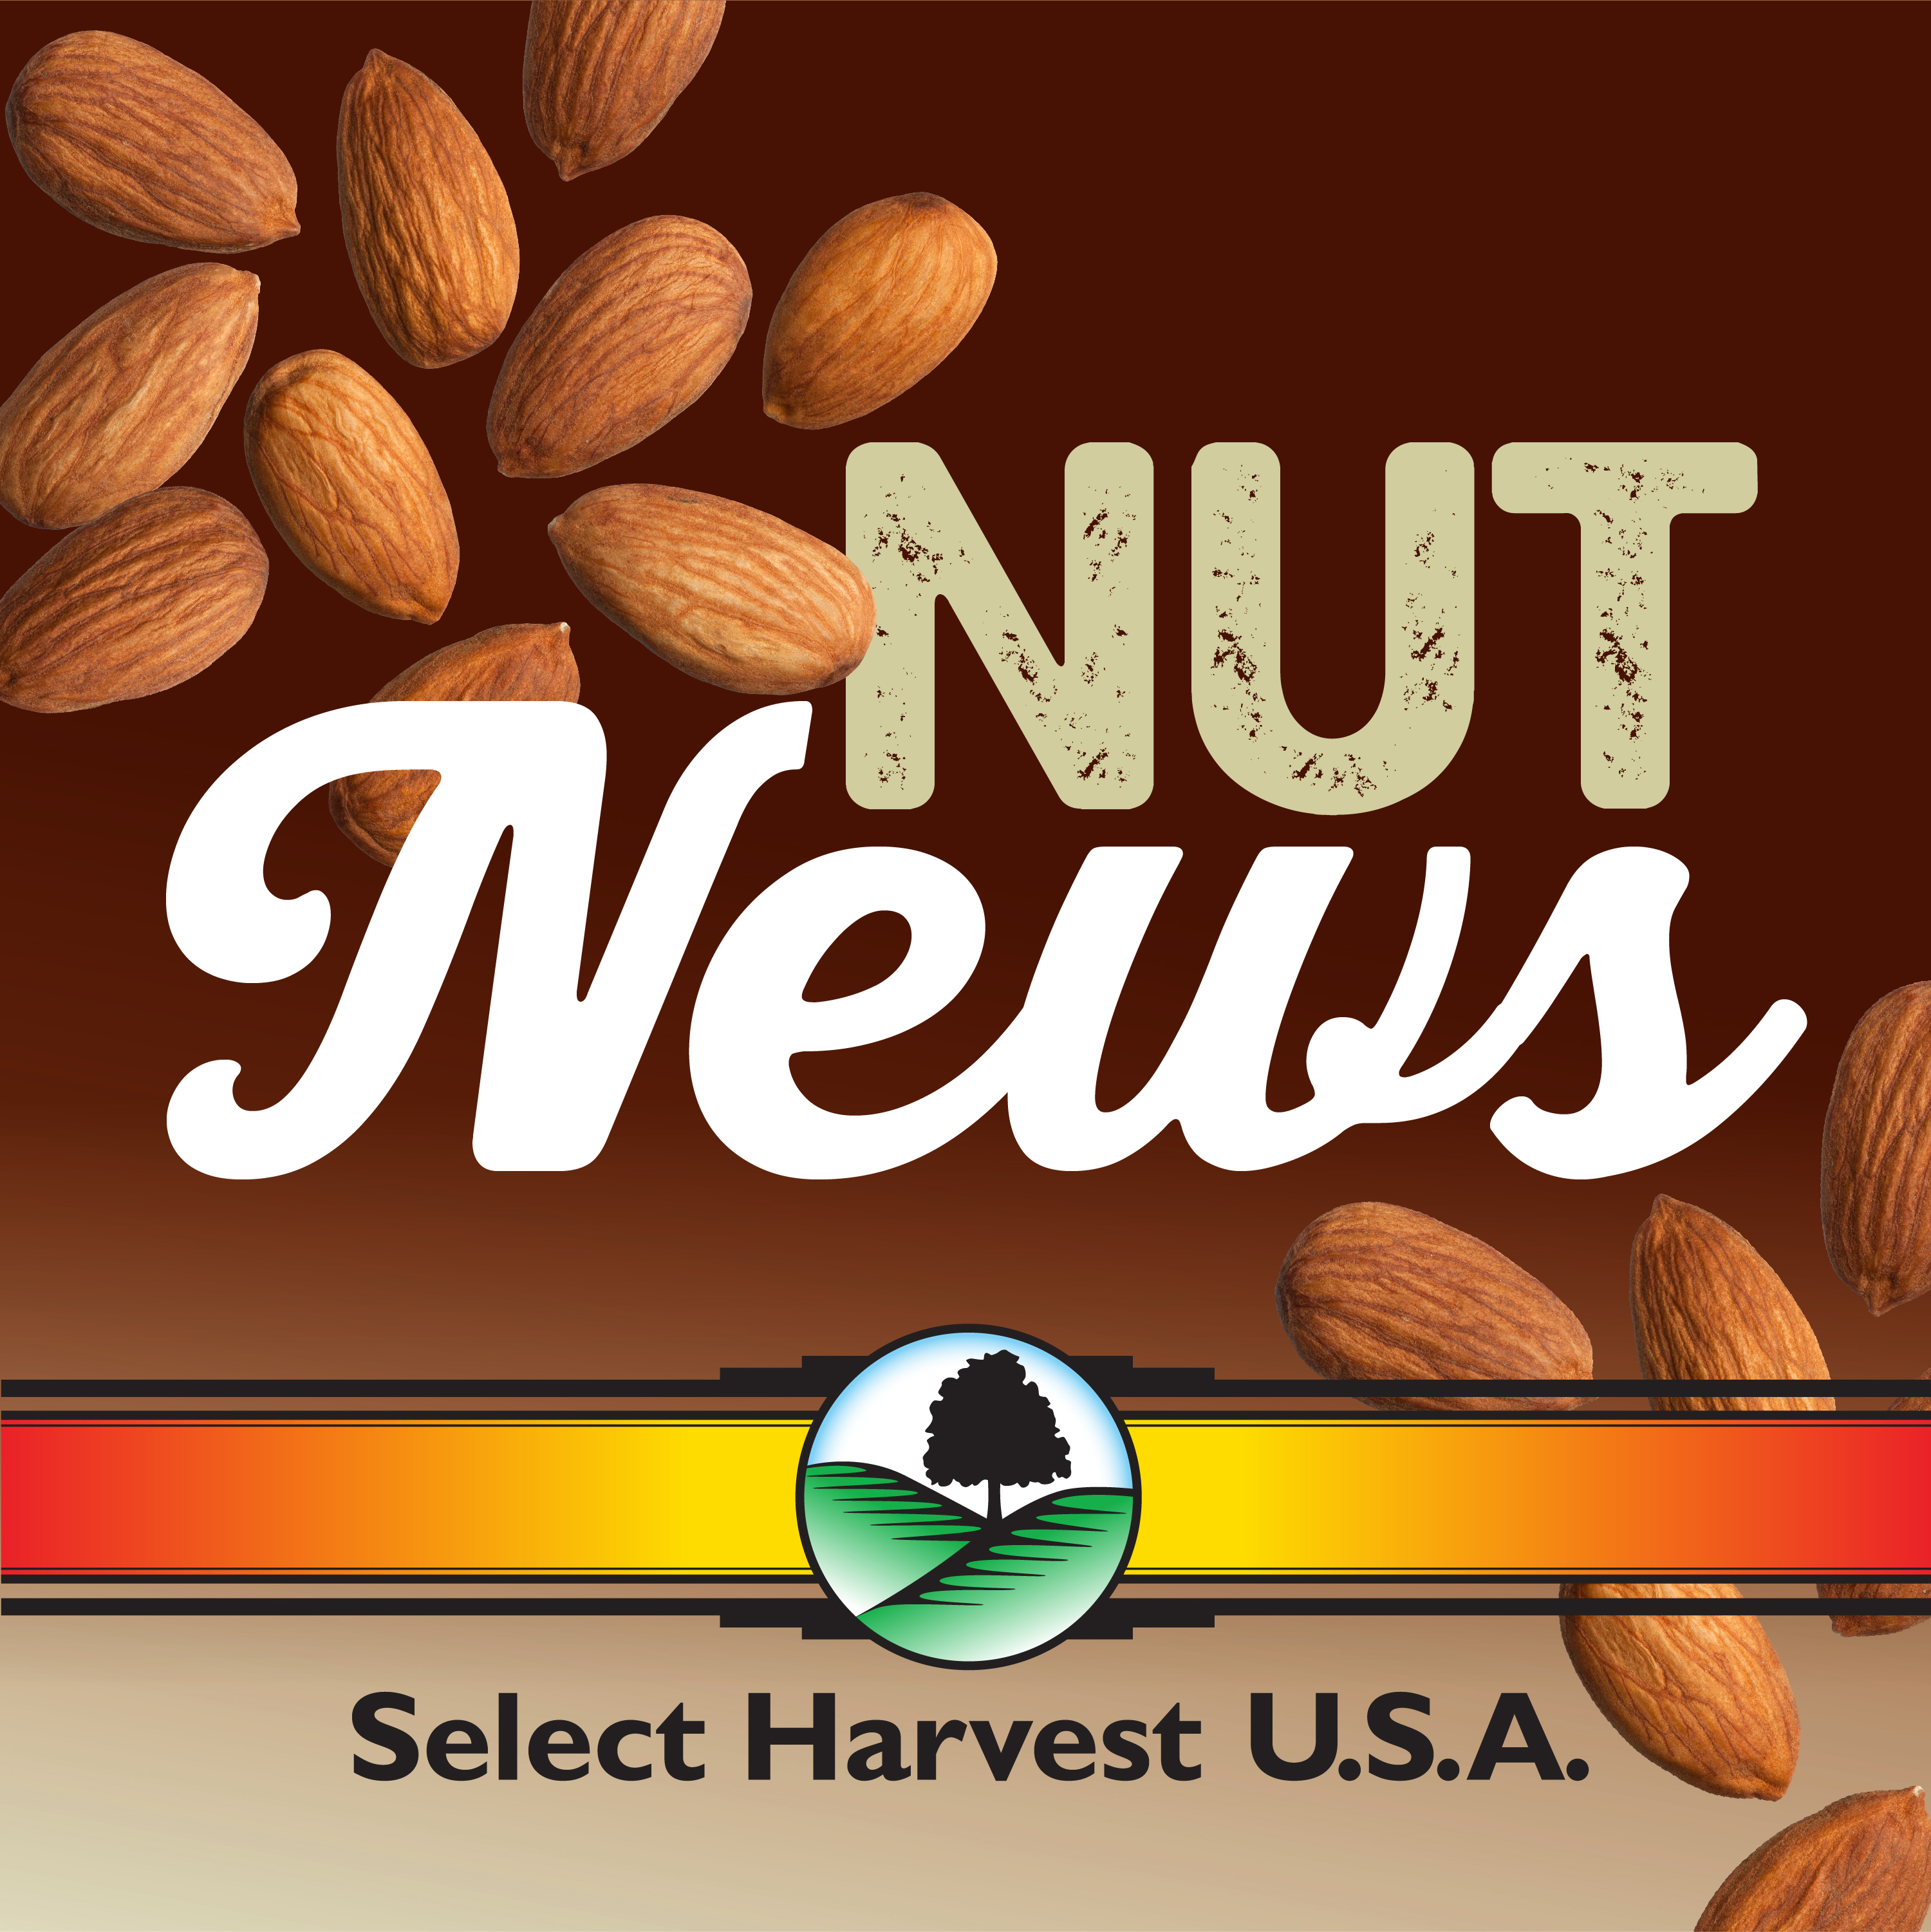 Inshell Almonds: Growth Driver of the California Almond Industry